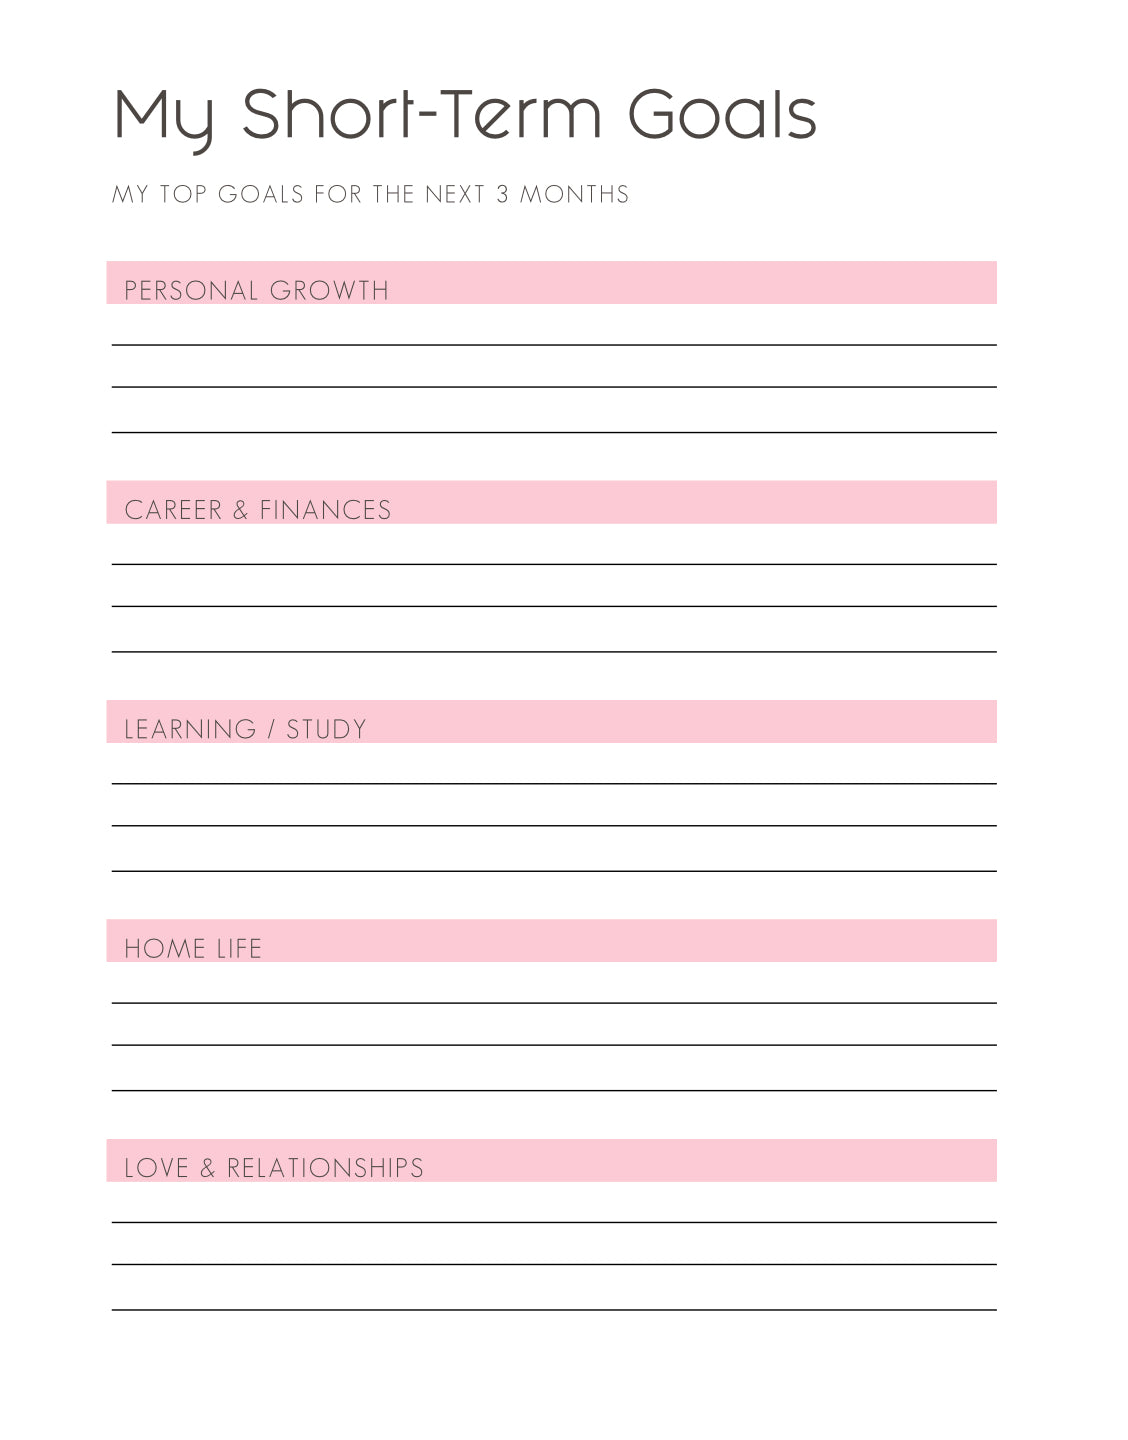 Untamed Joy Guided Workbook and Journal & Daily Questions BUNDLE